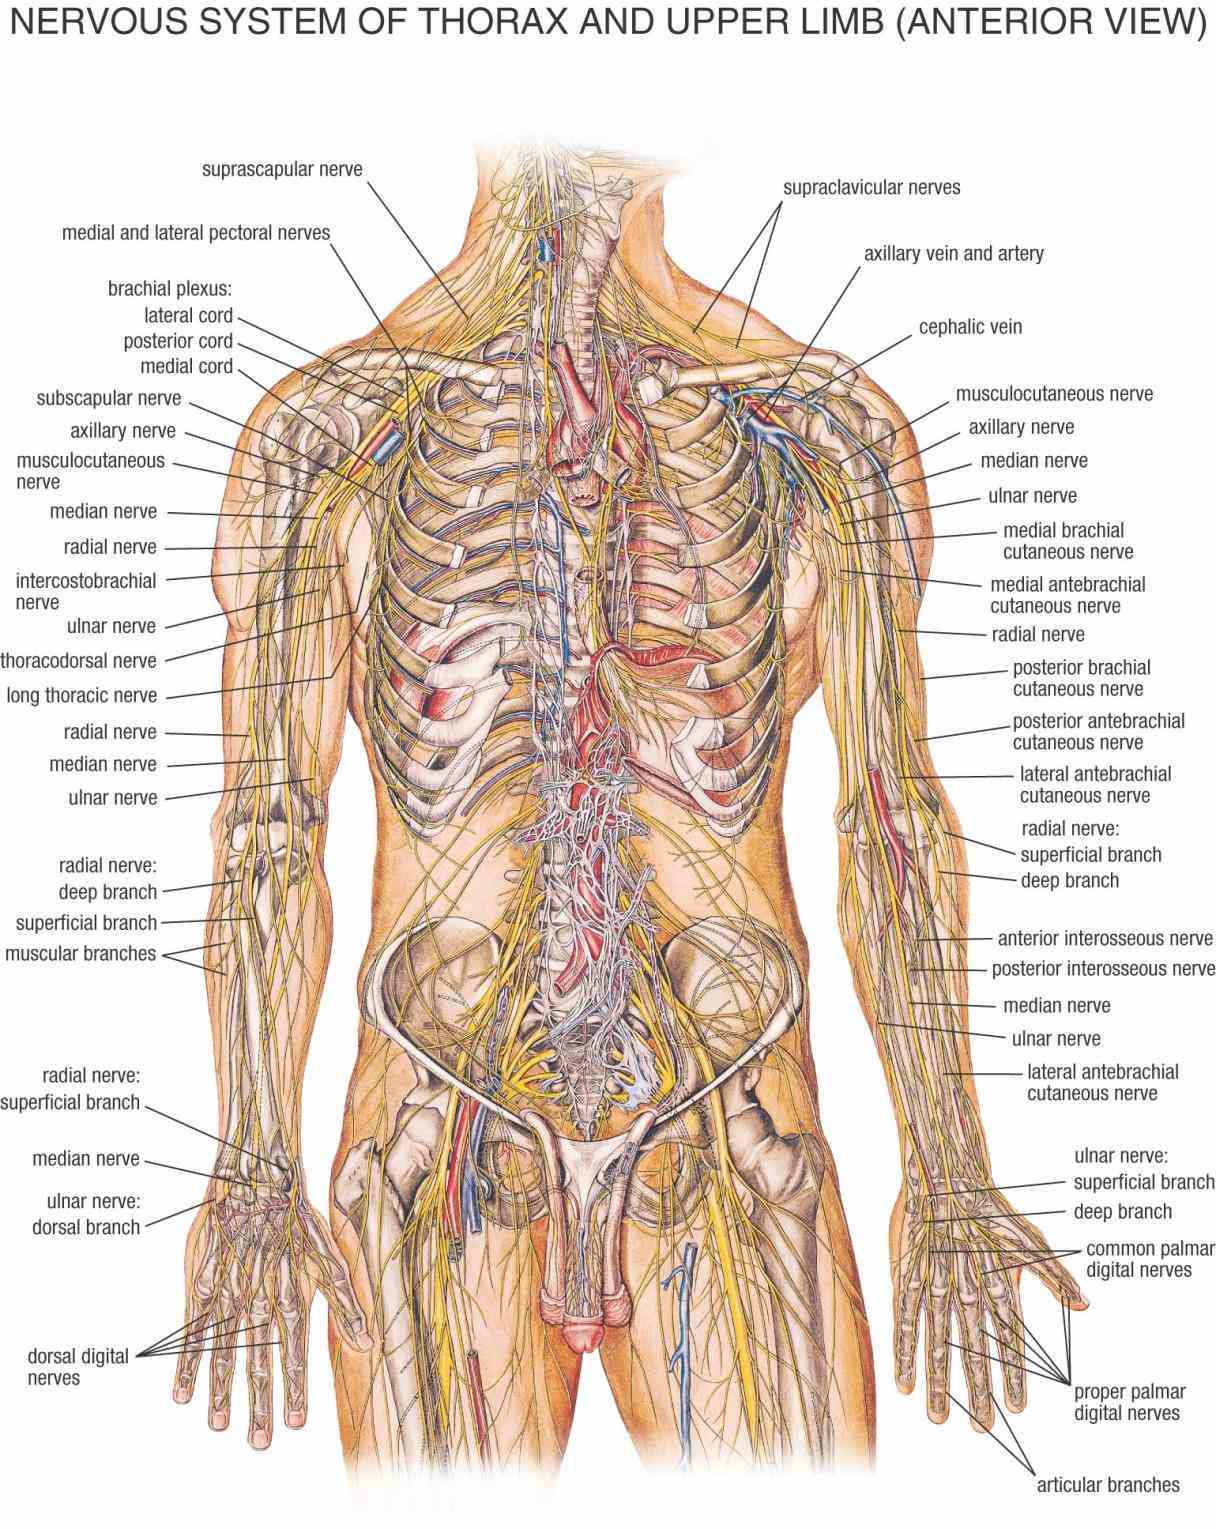 system part i neurons function parts the de Anatomy The Nervous System mar the central nervous system or cns